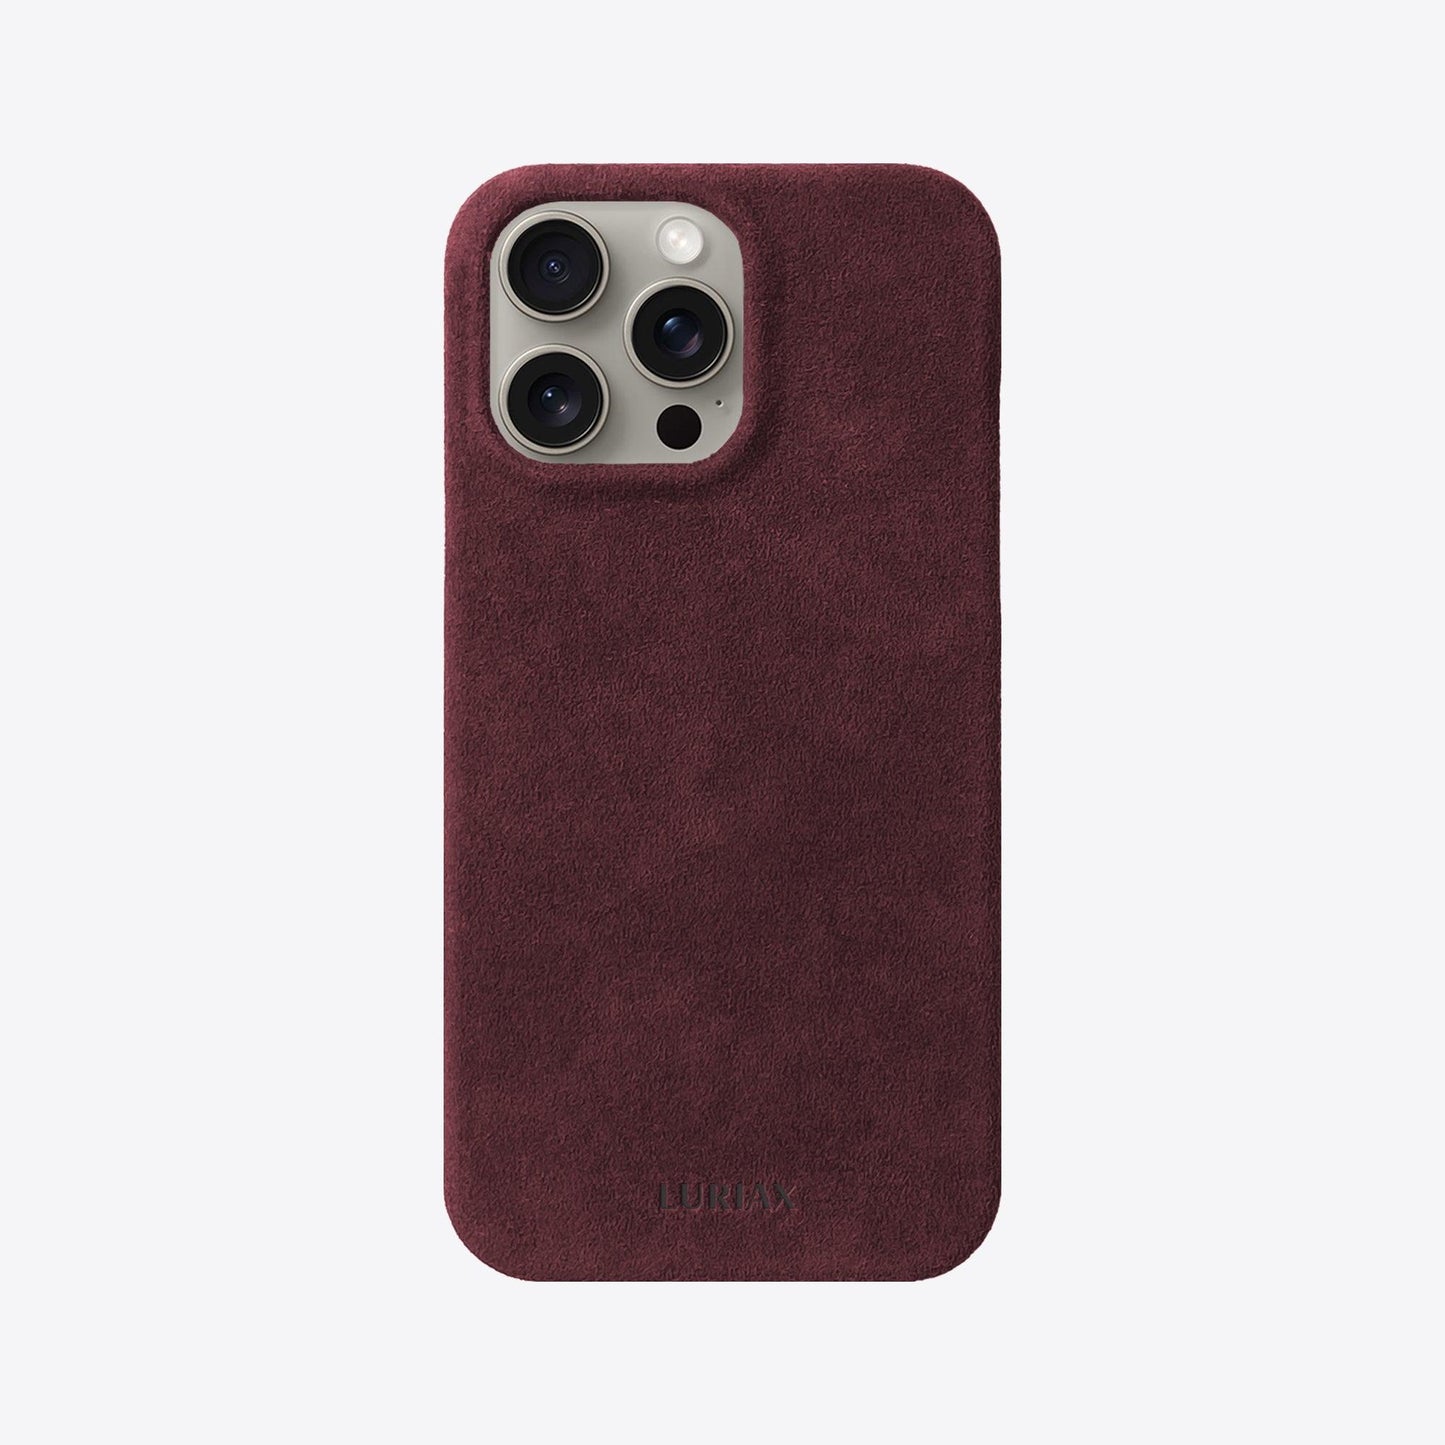 Alcantara Suede Leather iPhone Case and Accessories Collection - The Sport iPhone Case - Bordeaux - Luriax